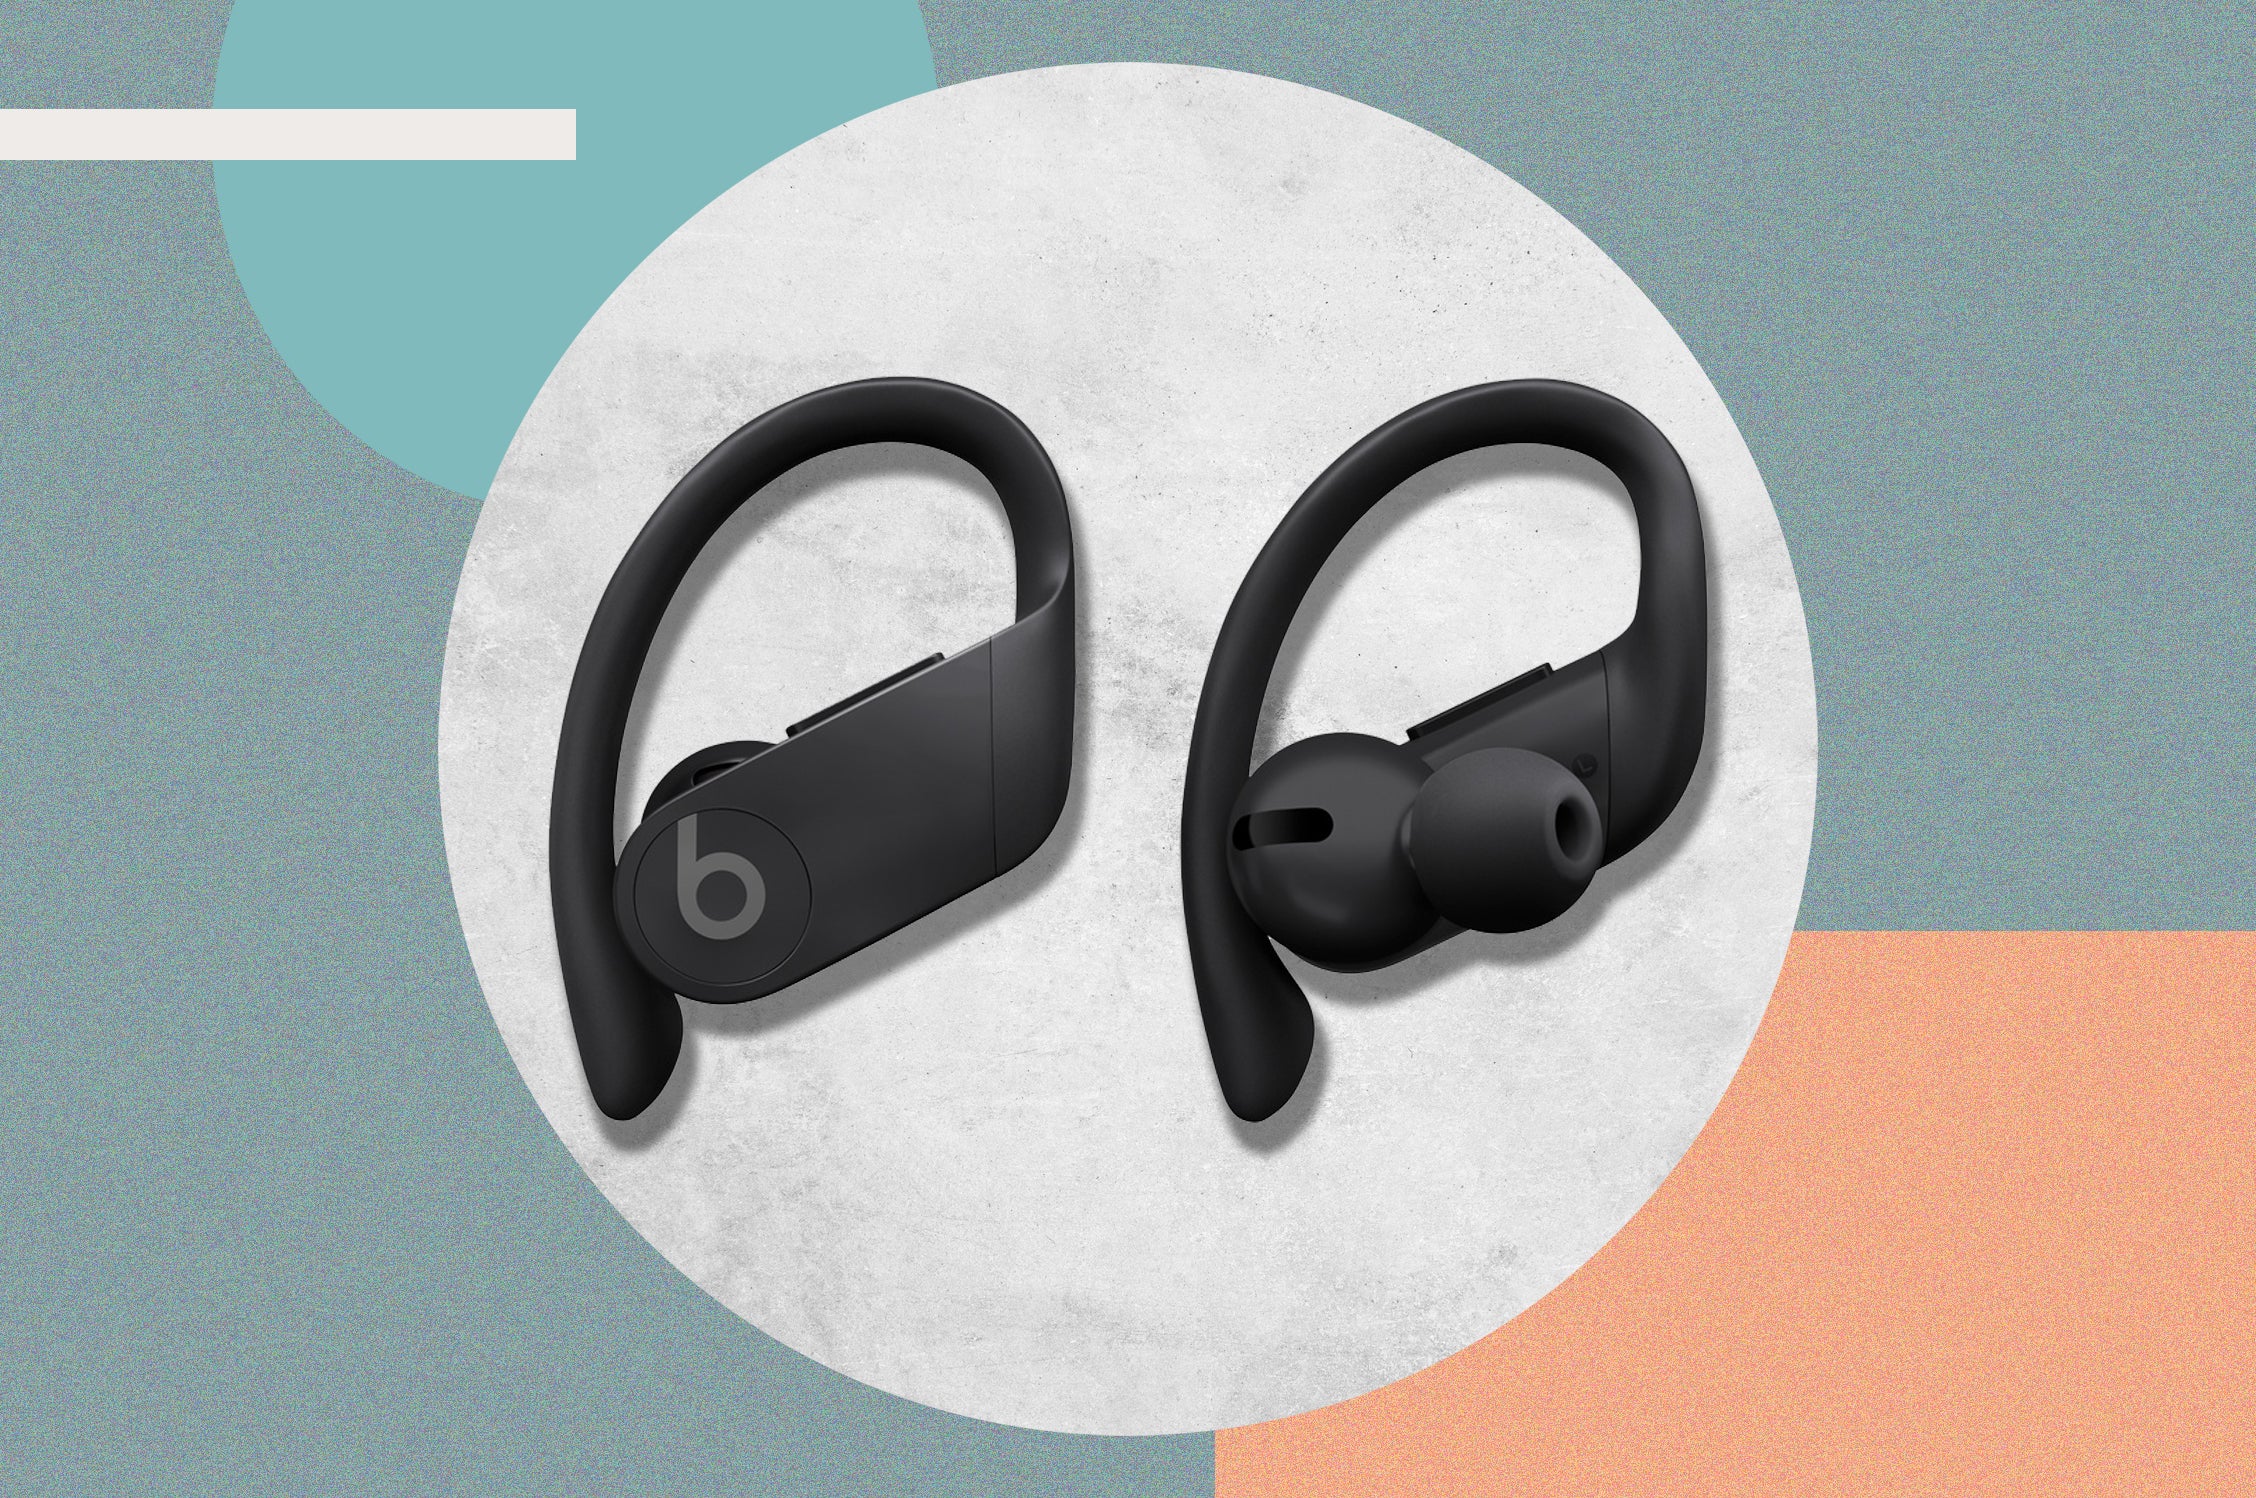 Beats Powerbeats pro review: The best Apple earbuds for running